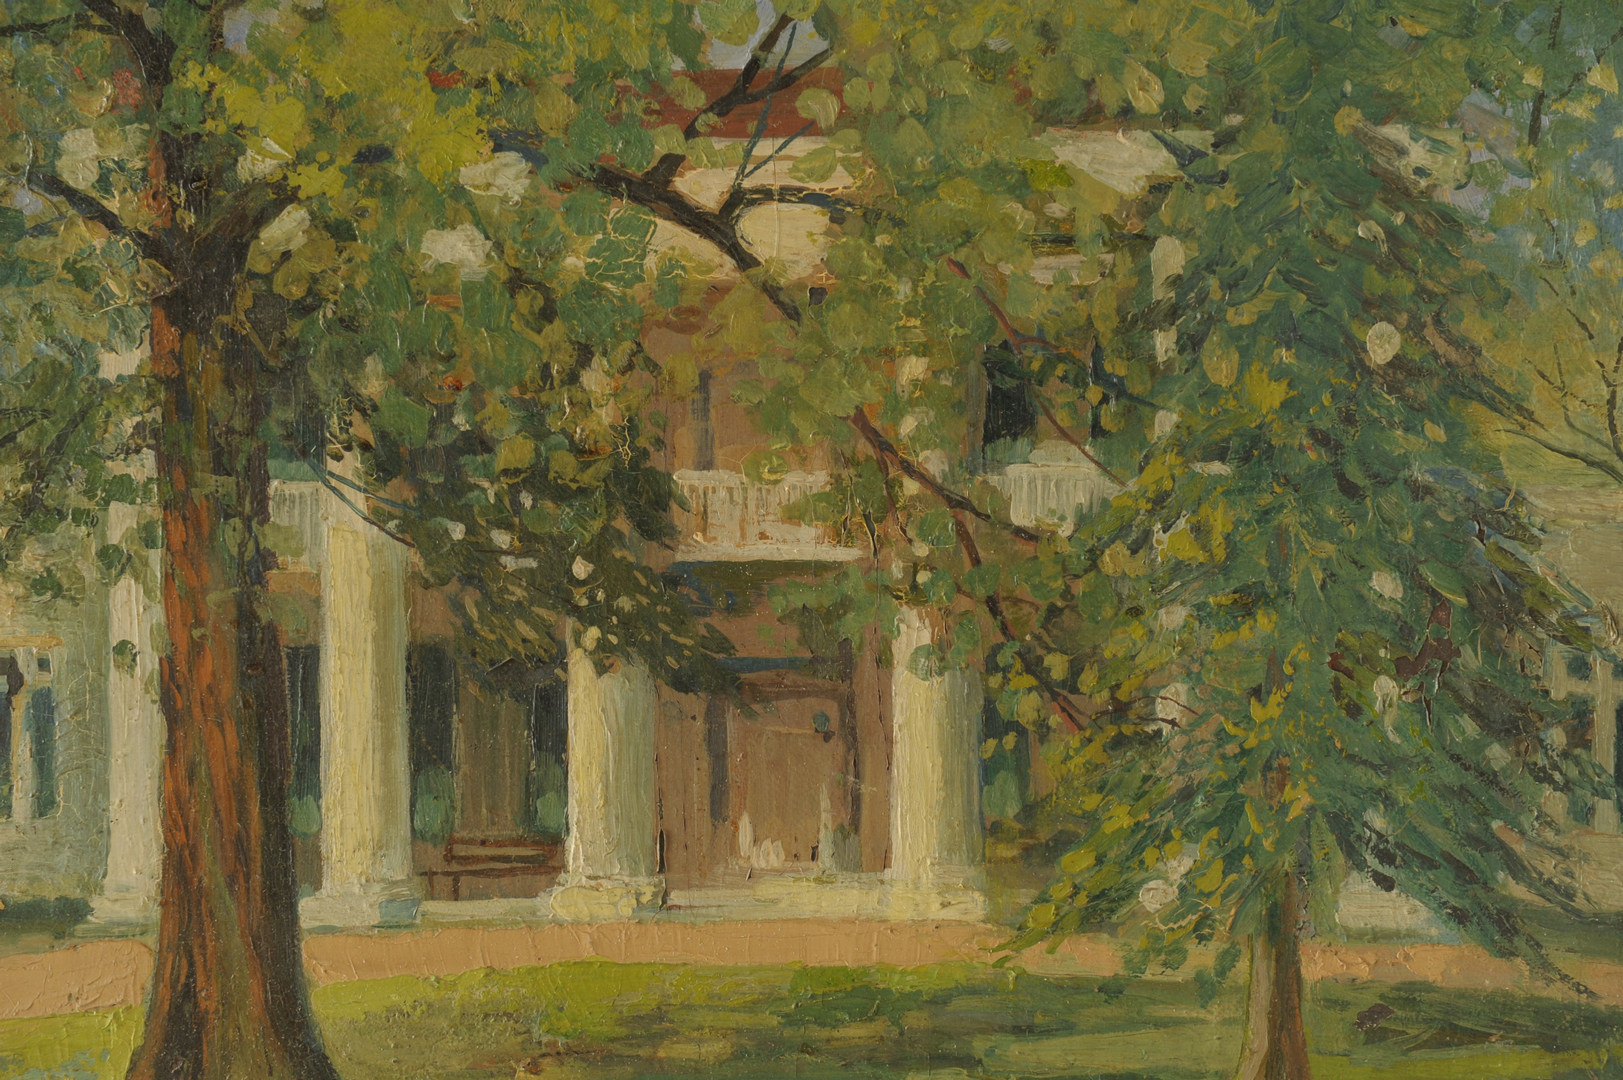 Lot 33: Mayna Treanor Avent oil on board, The Hermitage